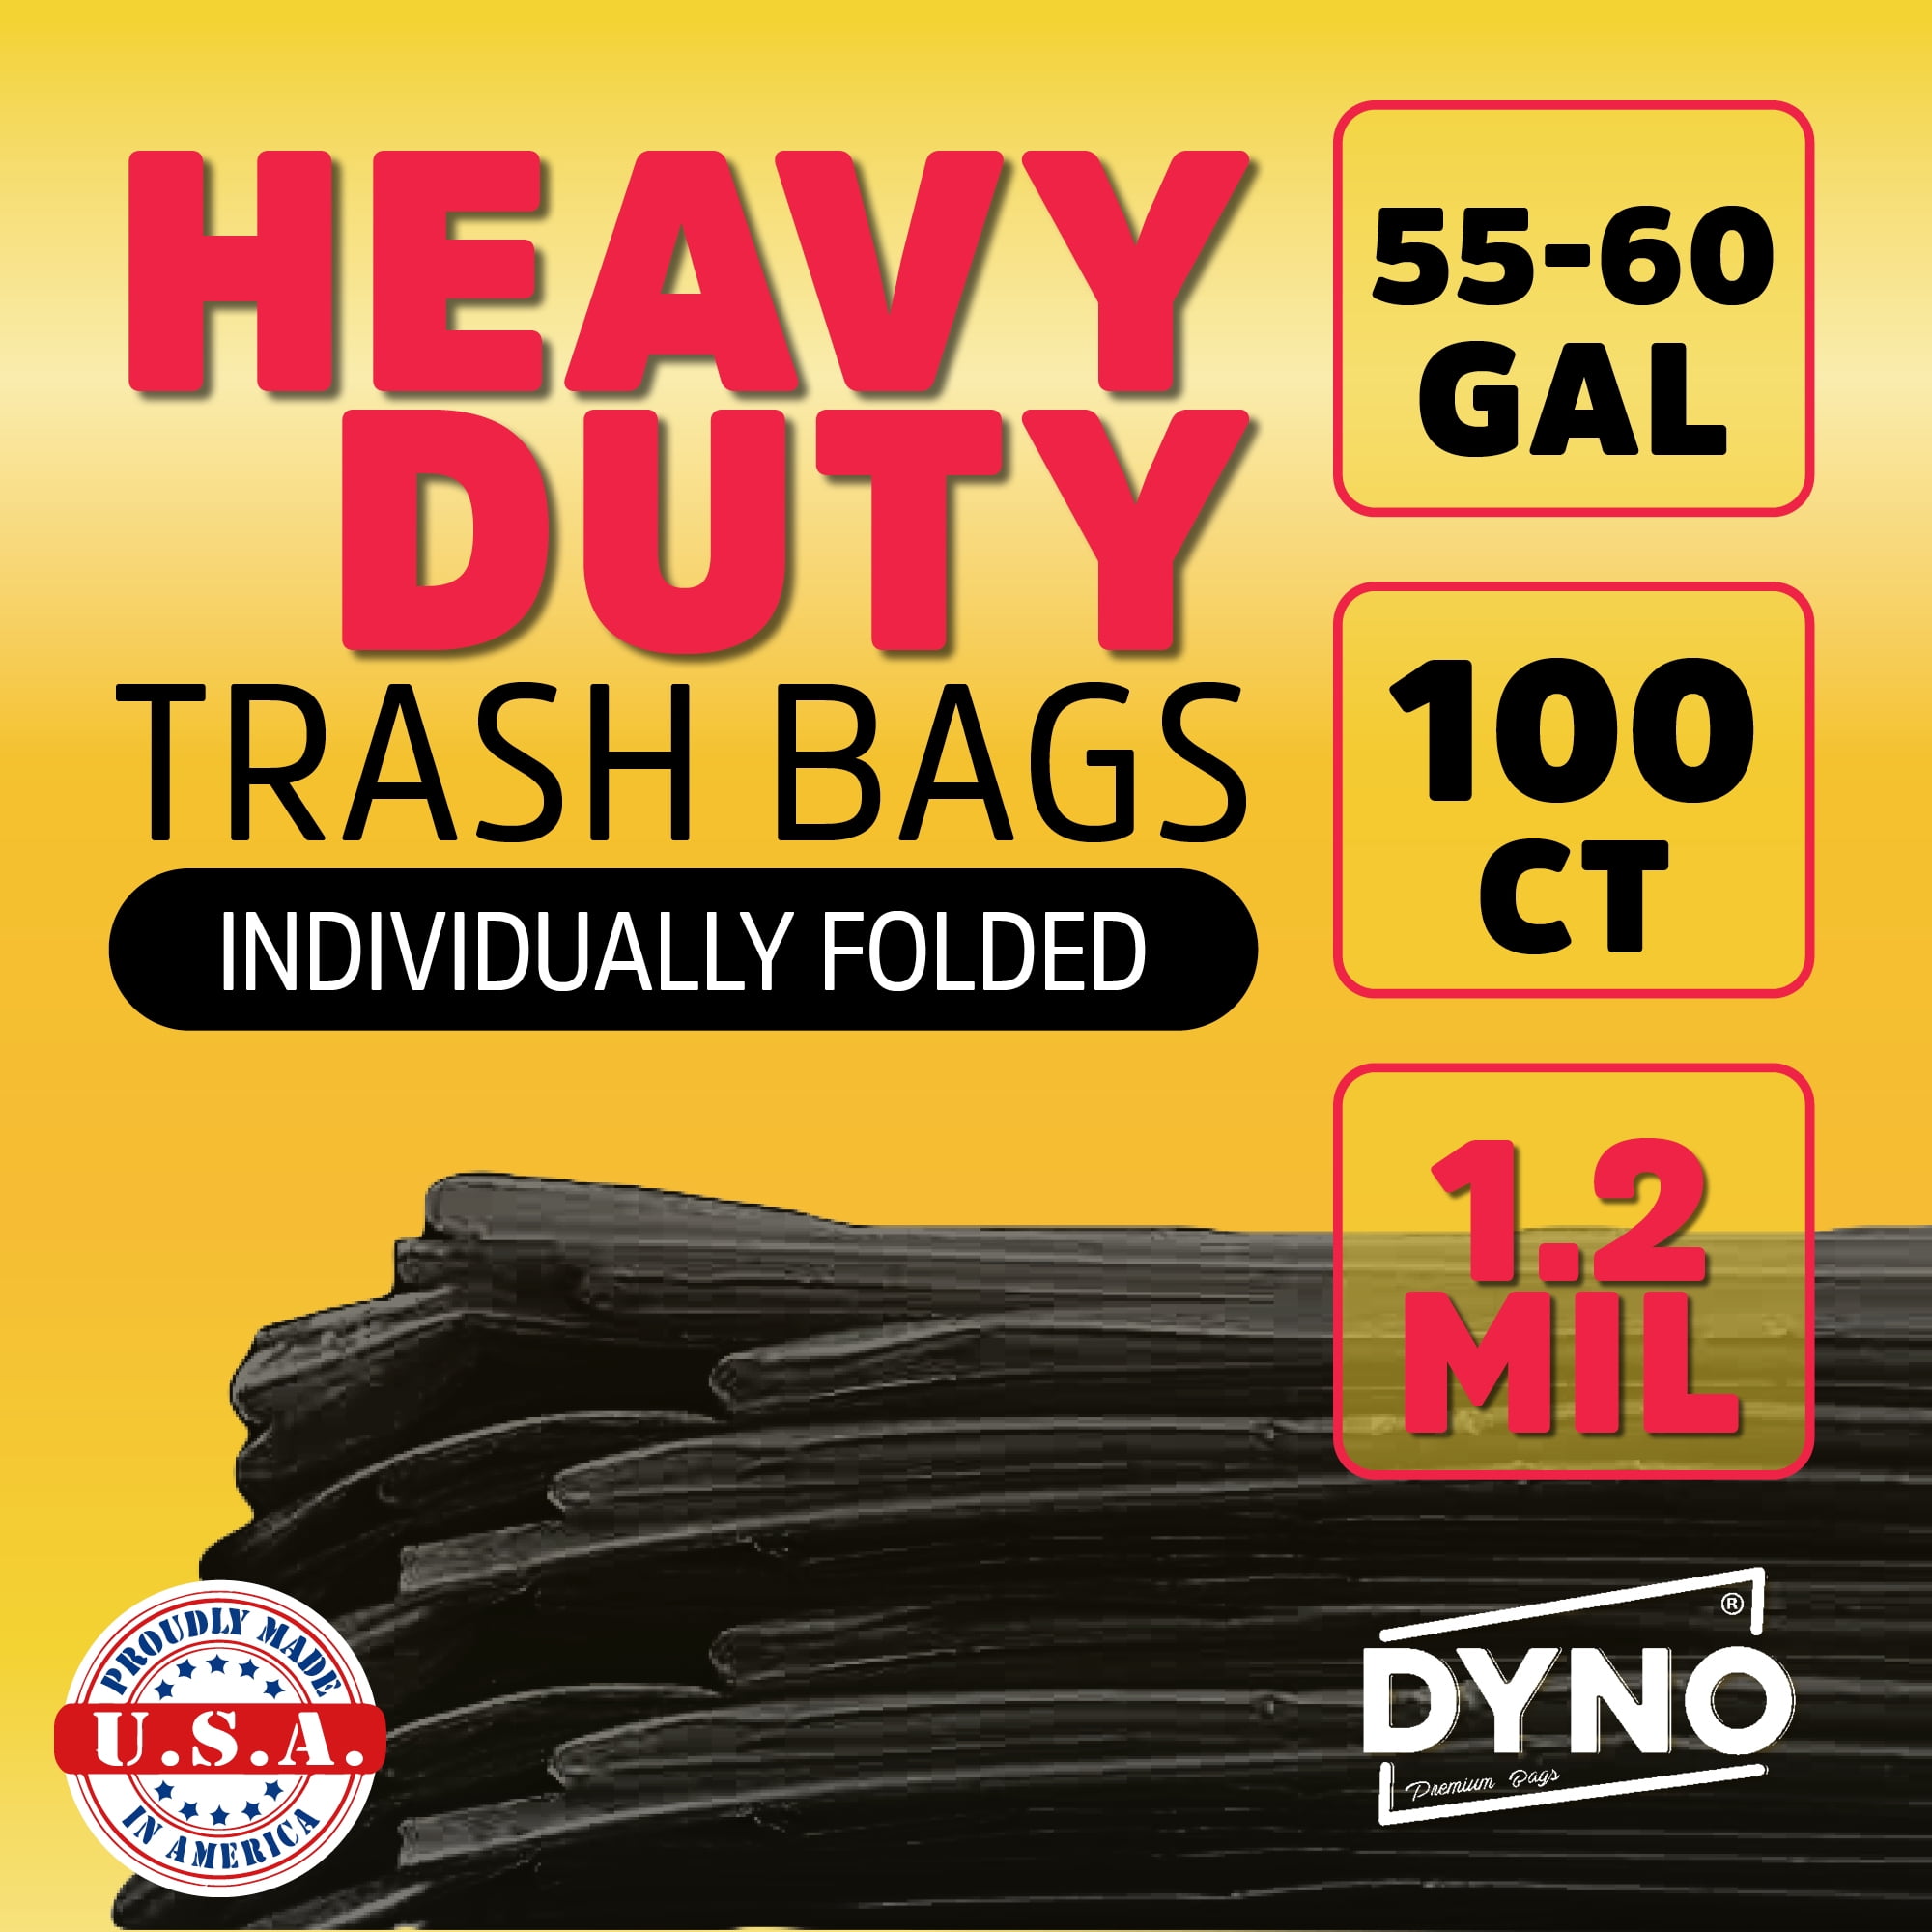 Dyno Products Online 60-Gallon, 1.2 Mil Thick Heavy-Duty Black Trash Bags -  50 Count Extra Large Plastic Garbage Liners Fit Huge Cans for Home Garden